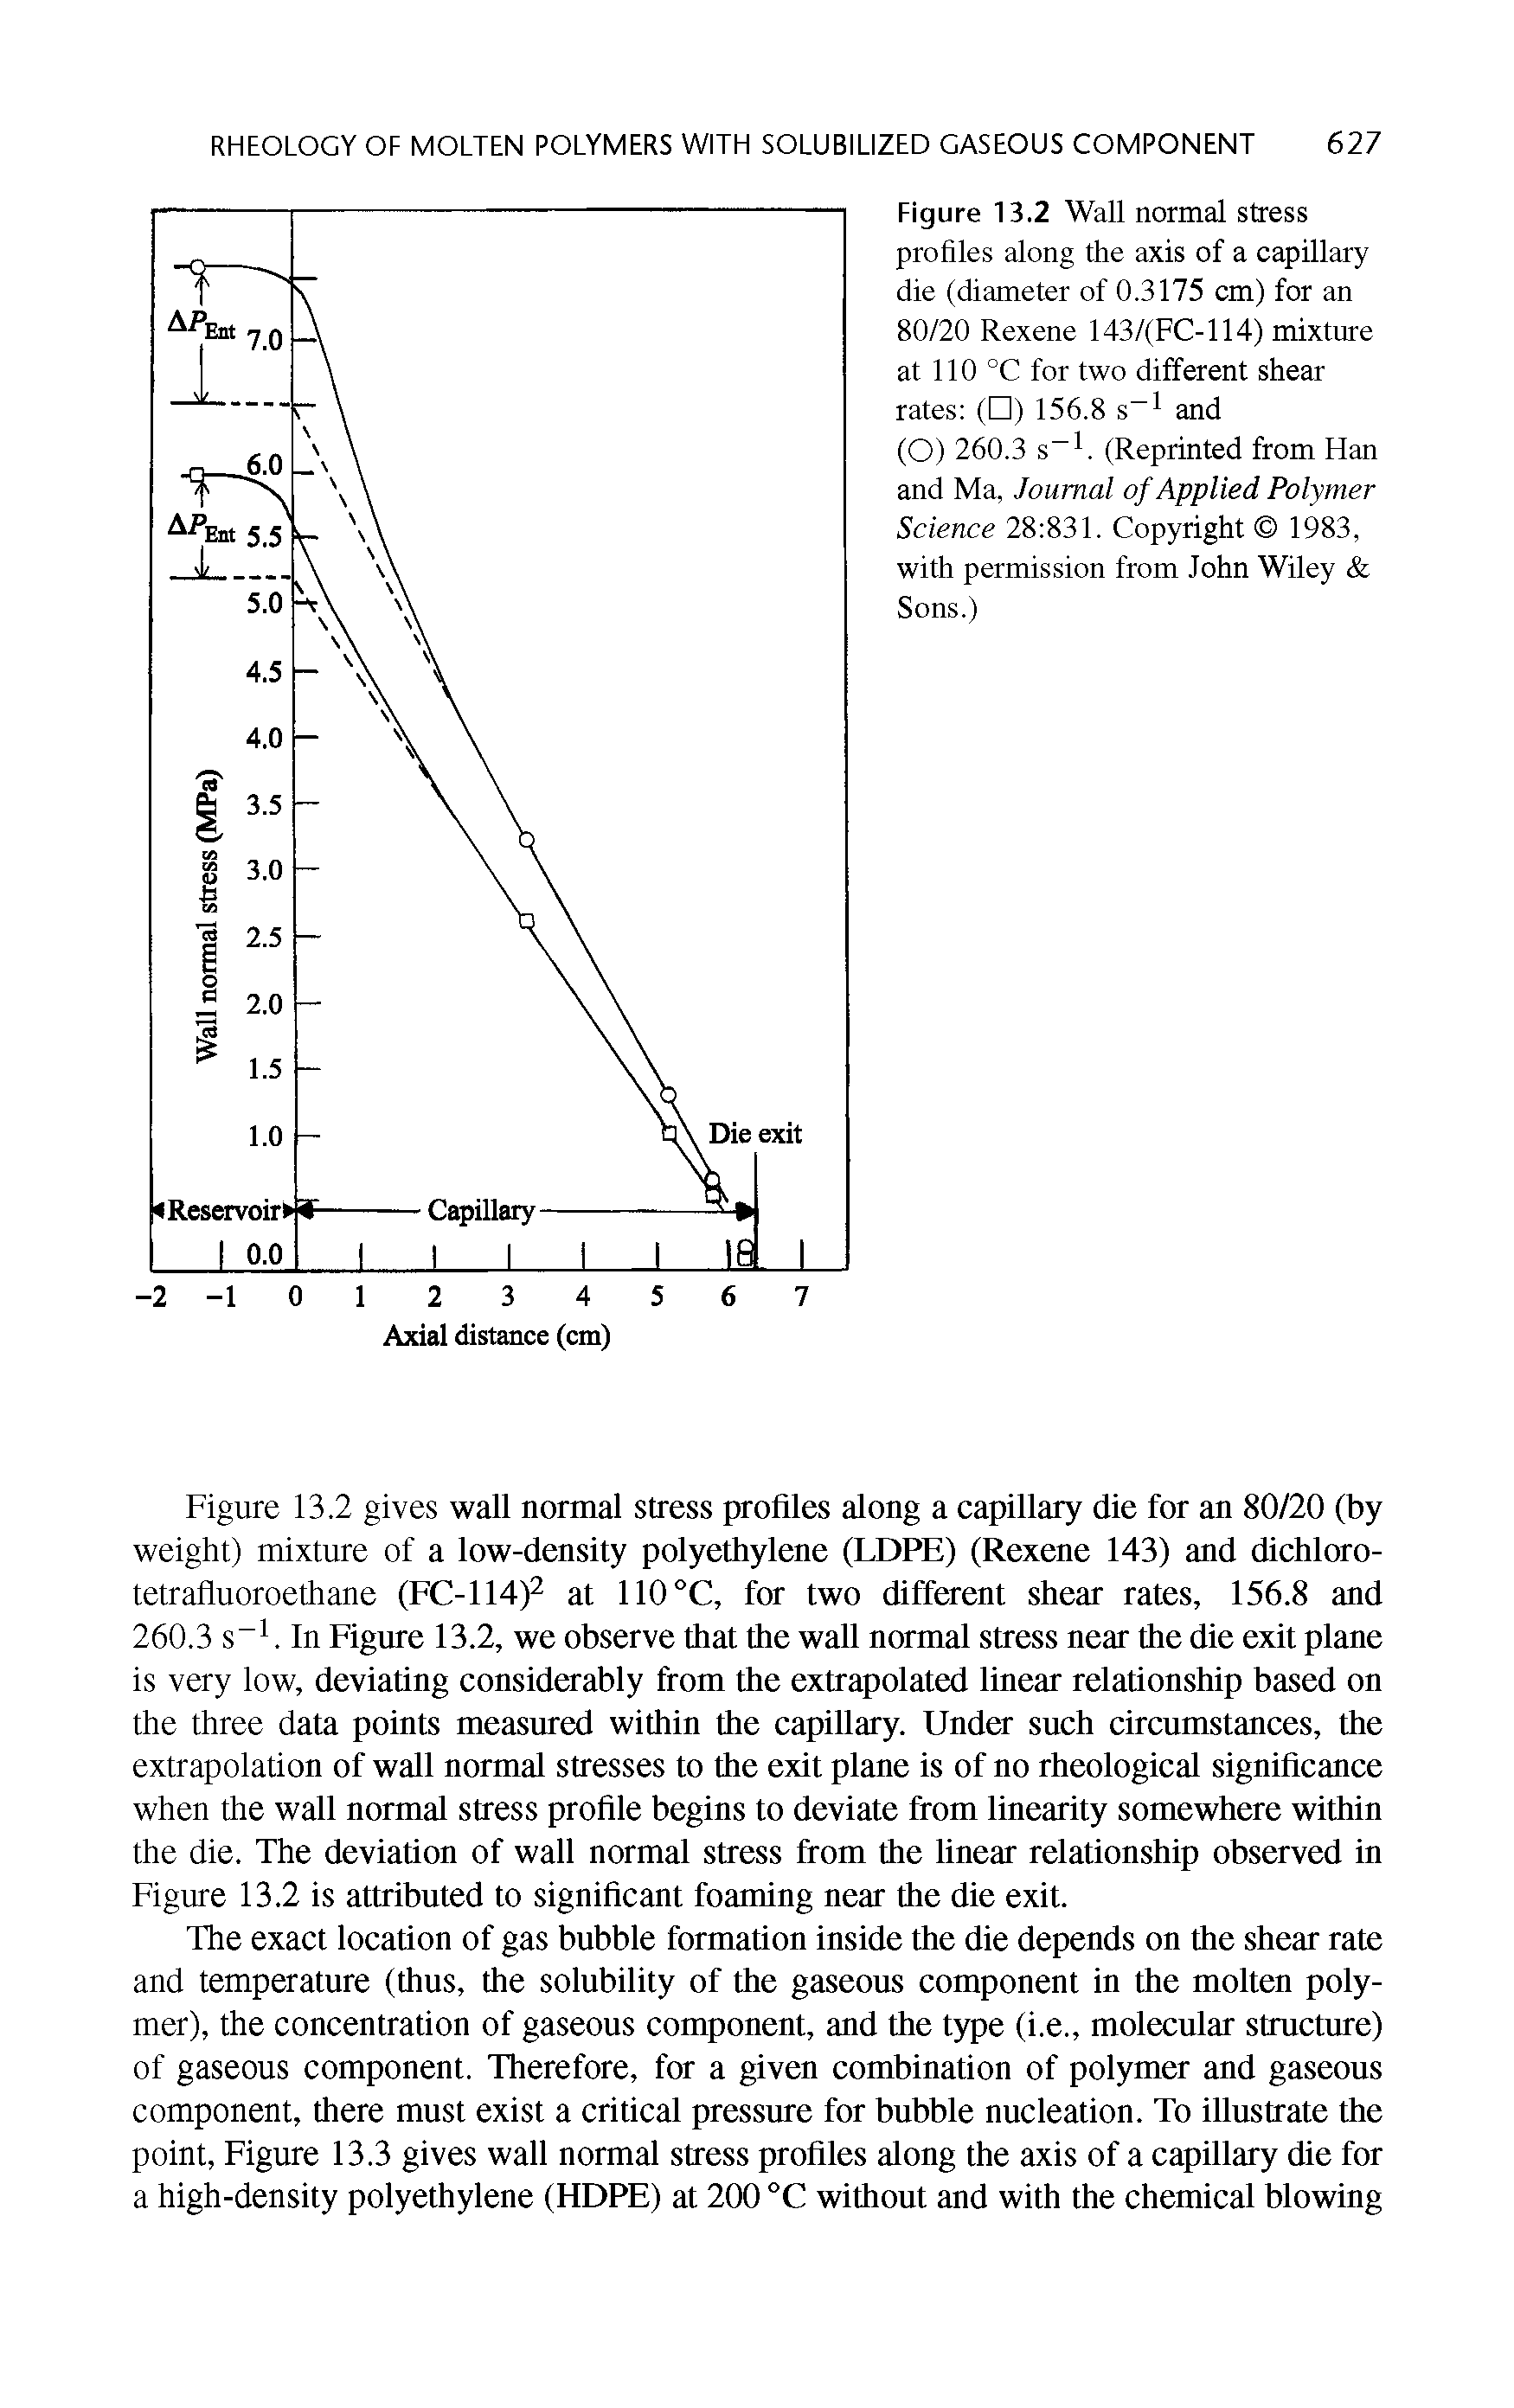 Figure 13.2 Wall normal stress profiles along the axis of a capillary die (diameter of 0.3175 cm) for an 80/20 Rexene 143/(FC-114) mixture at 110 °C for two different shear rates ( ) 156.8 s l and (O) 260.3 s l. (Reprinted from Han and Ma, Journal of Applied Polymer Science 28 831. Copyright 1983, with permission from John Wiley Sons.)...